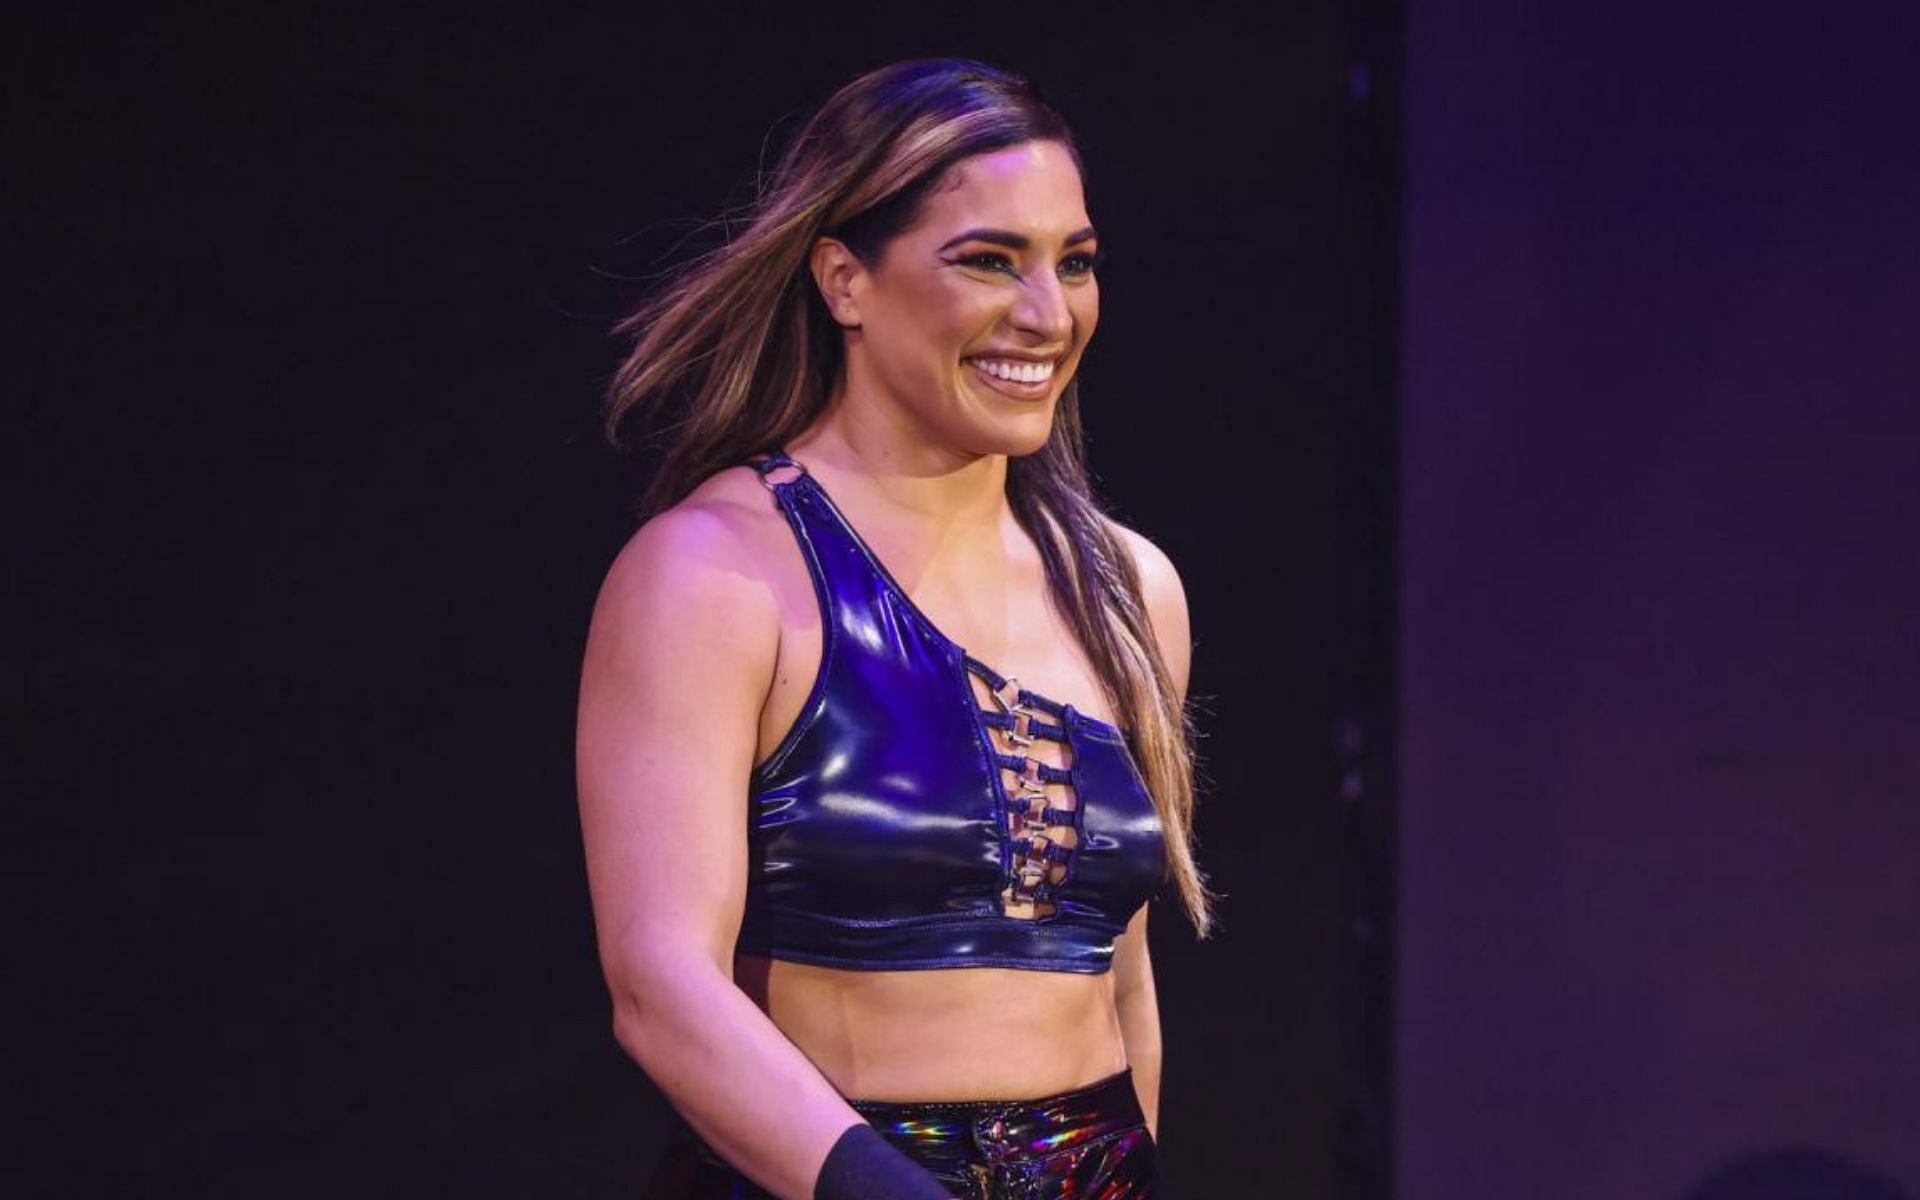 Raquel Rodriguez has already had a title match within a couple of weeks of her debut on SmackDown!